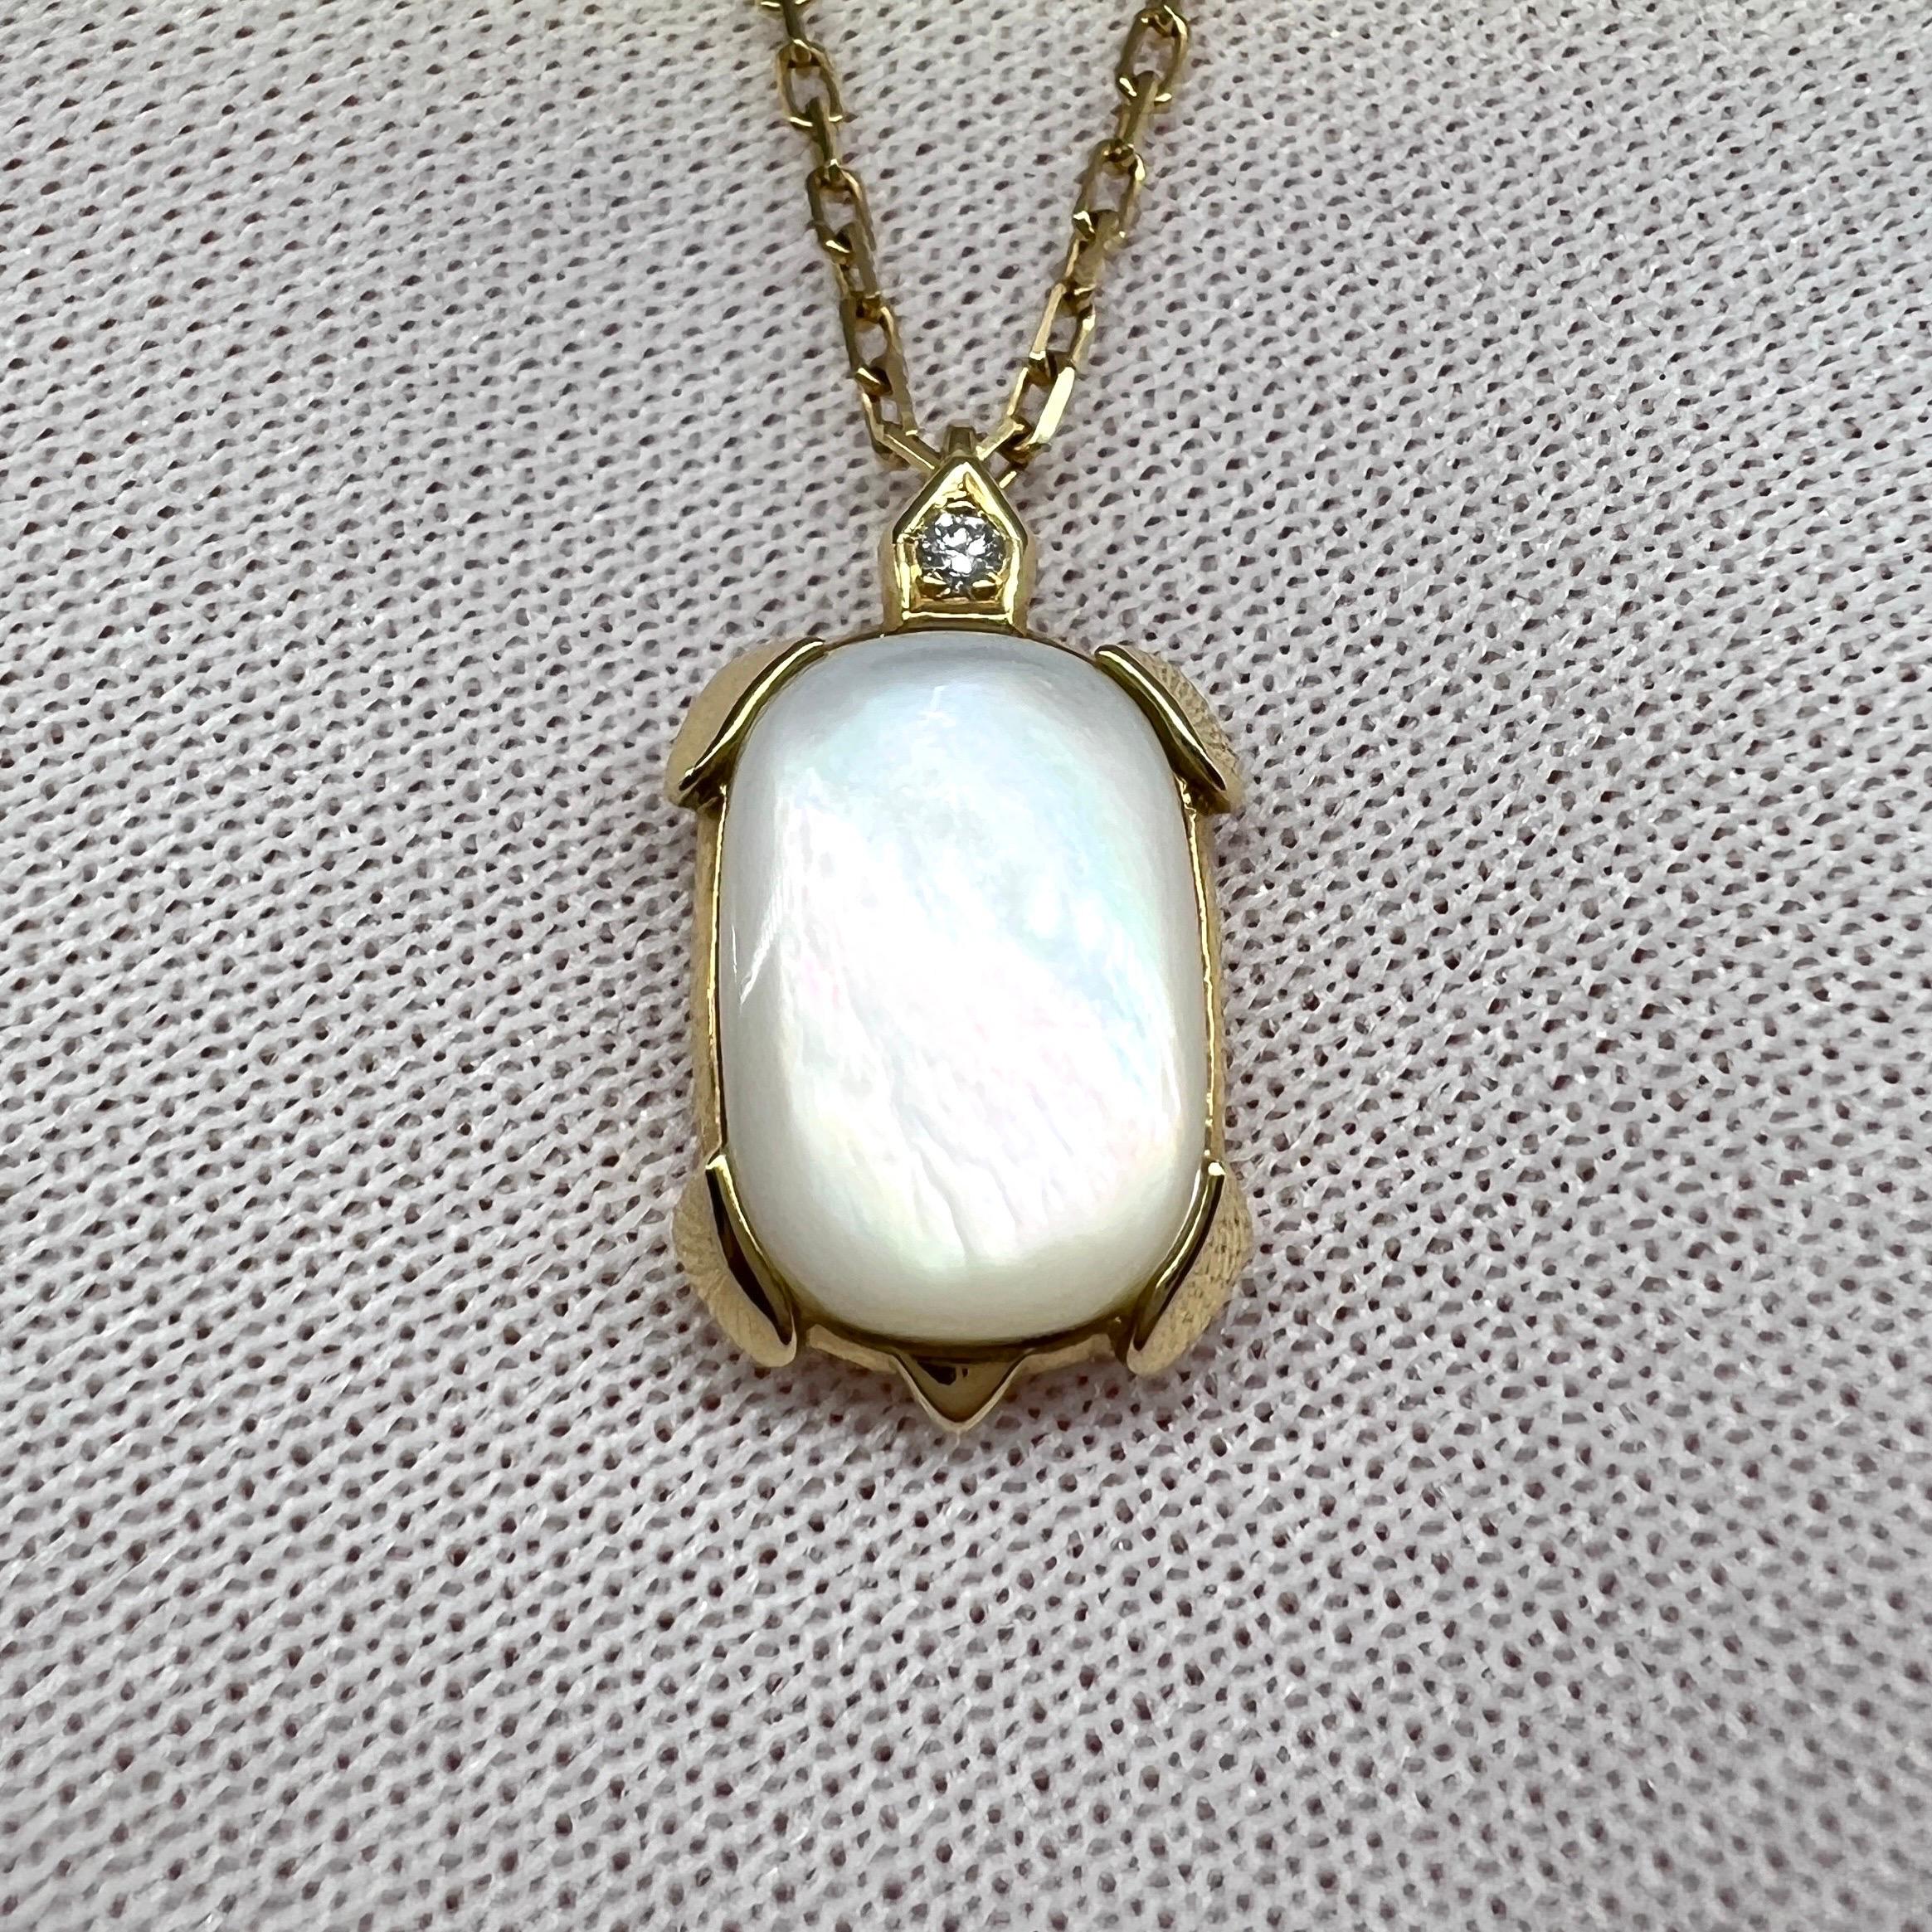 Rare Cartier Tortue Mother of Pearl & Diamond 18k Yellow Gold Pendant Necklace For Sale 6